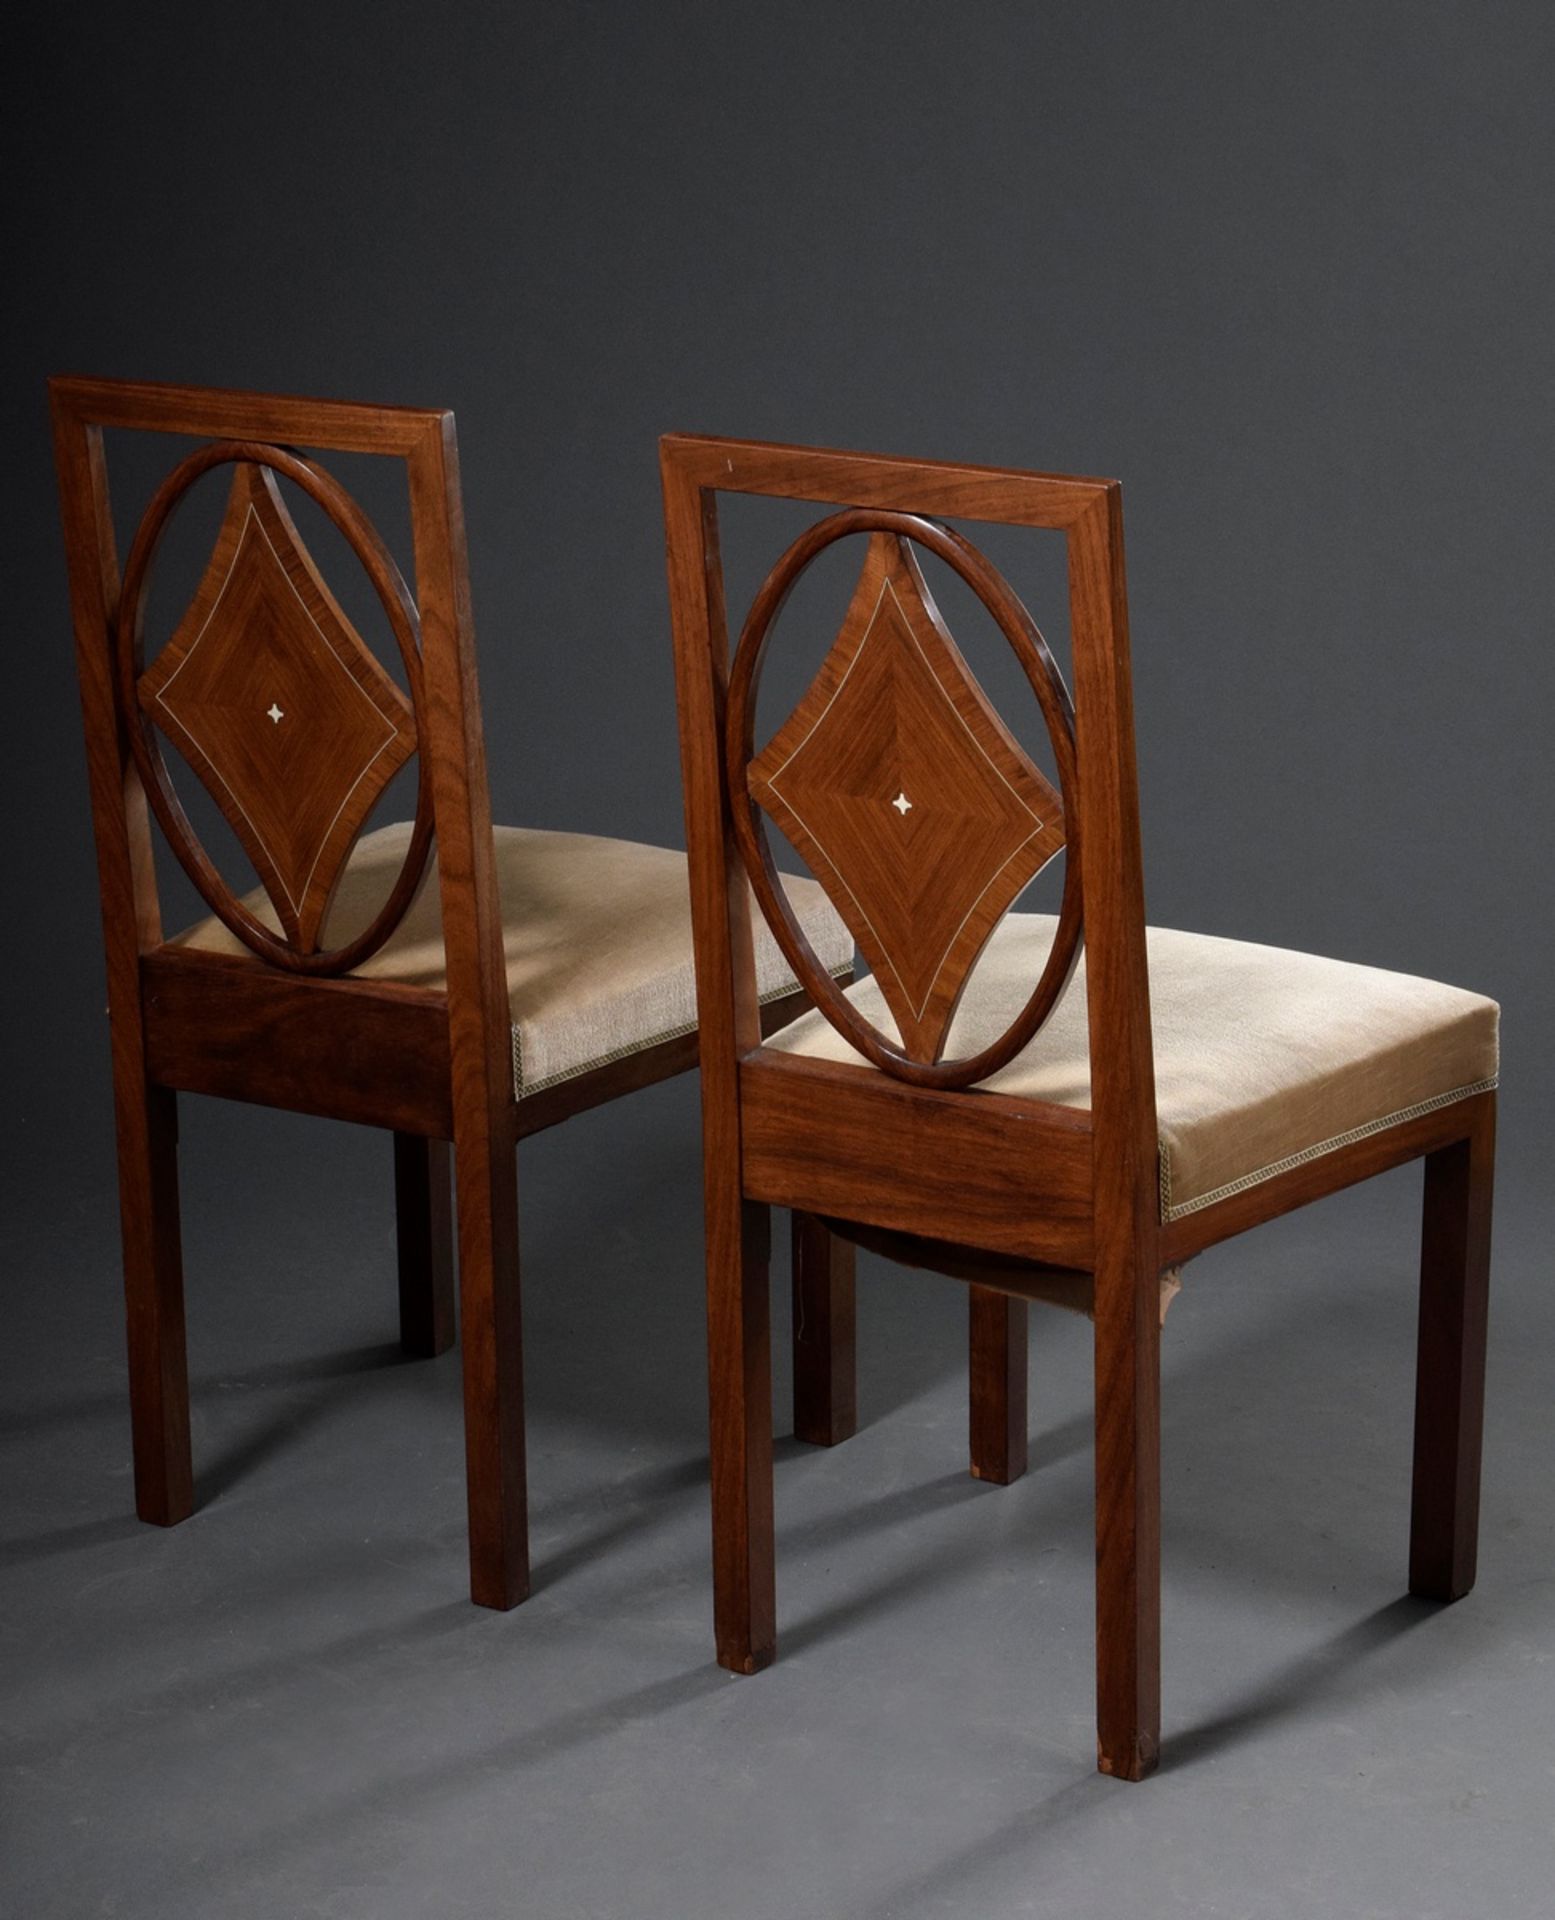 2 Art Deco chairs with oval framing and diamond motif in the backrest, Bruno Paul circle, rosewood  - Image 2 of 6